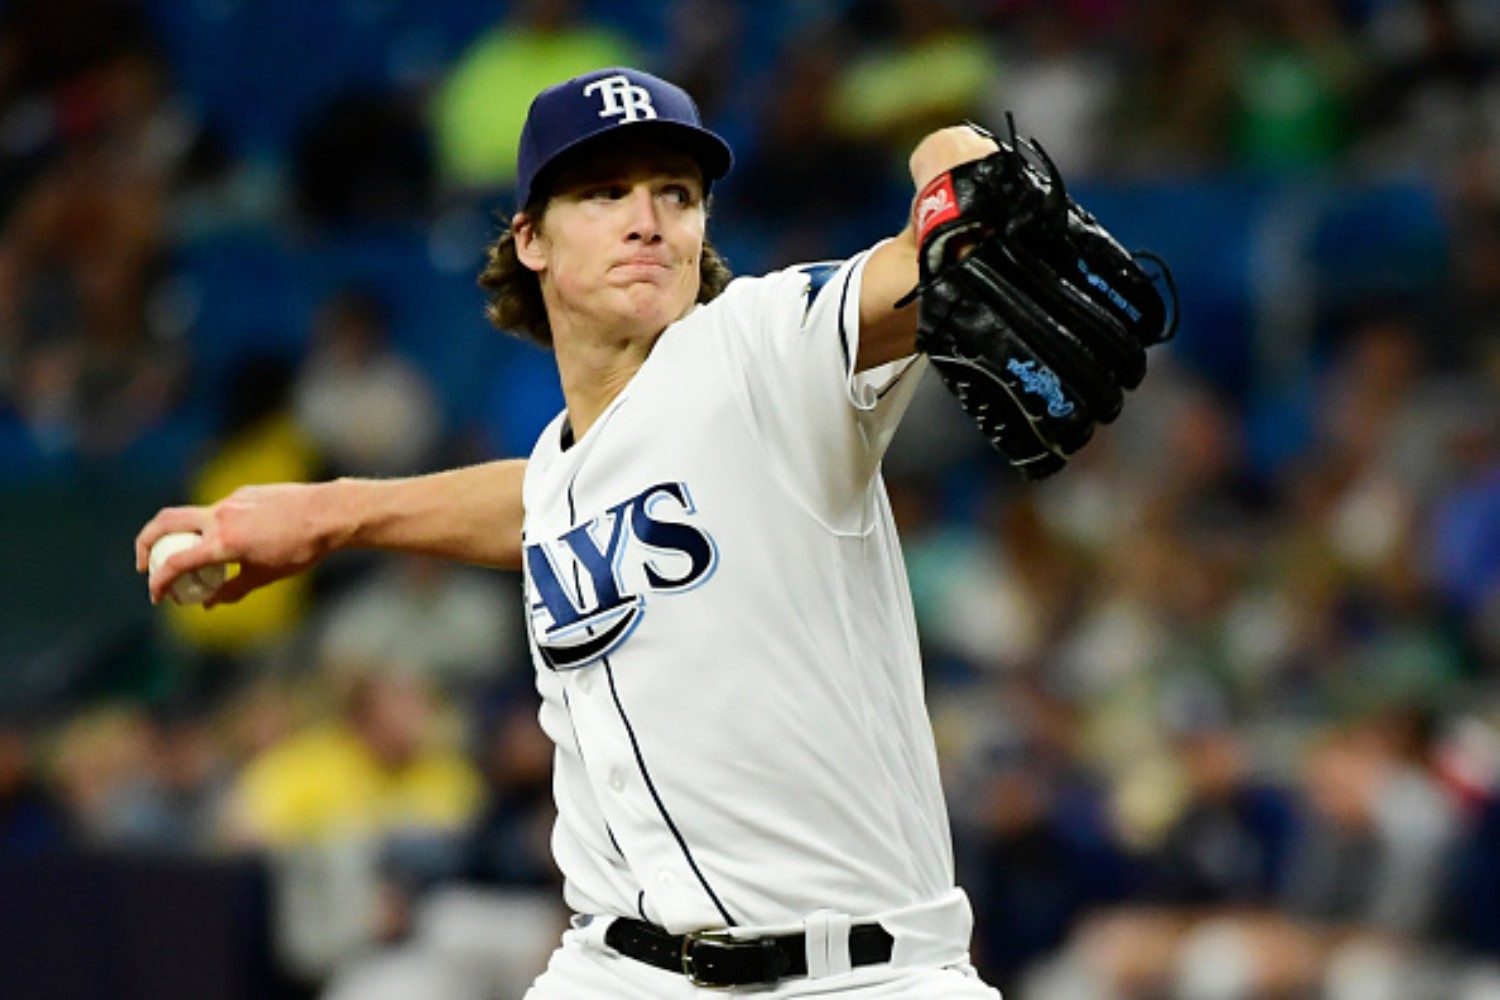 Rays Star Pitcher Tyler Glasnow’s Career Took a Turn For the Better After Leaving Pittsburgh